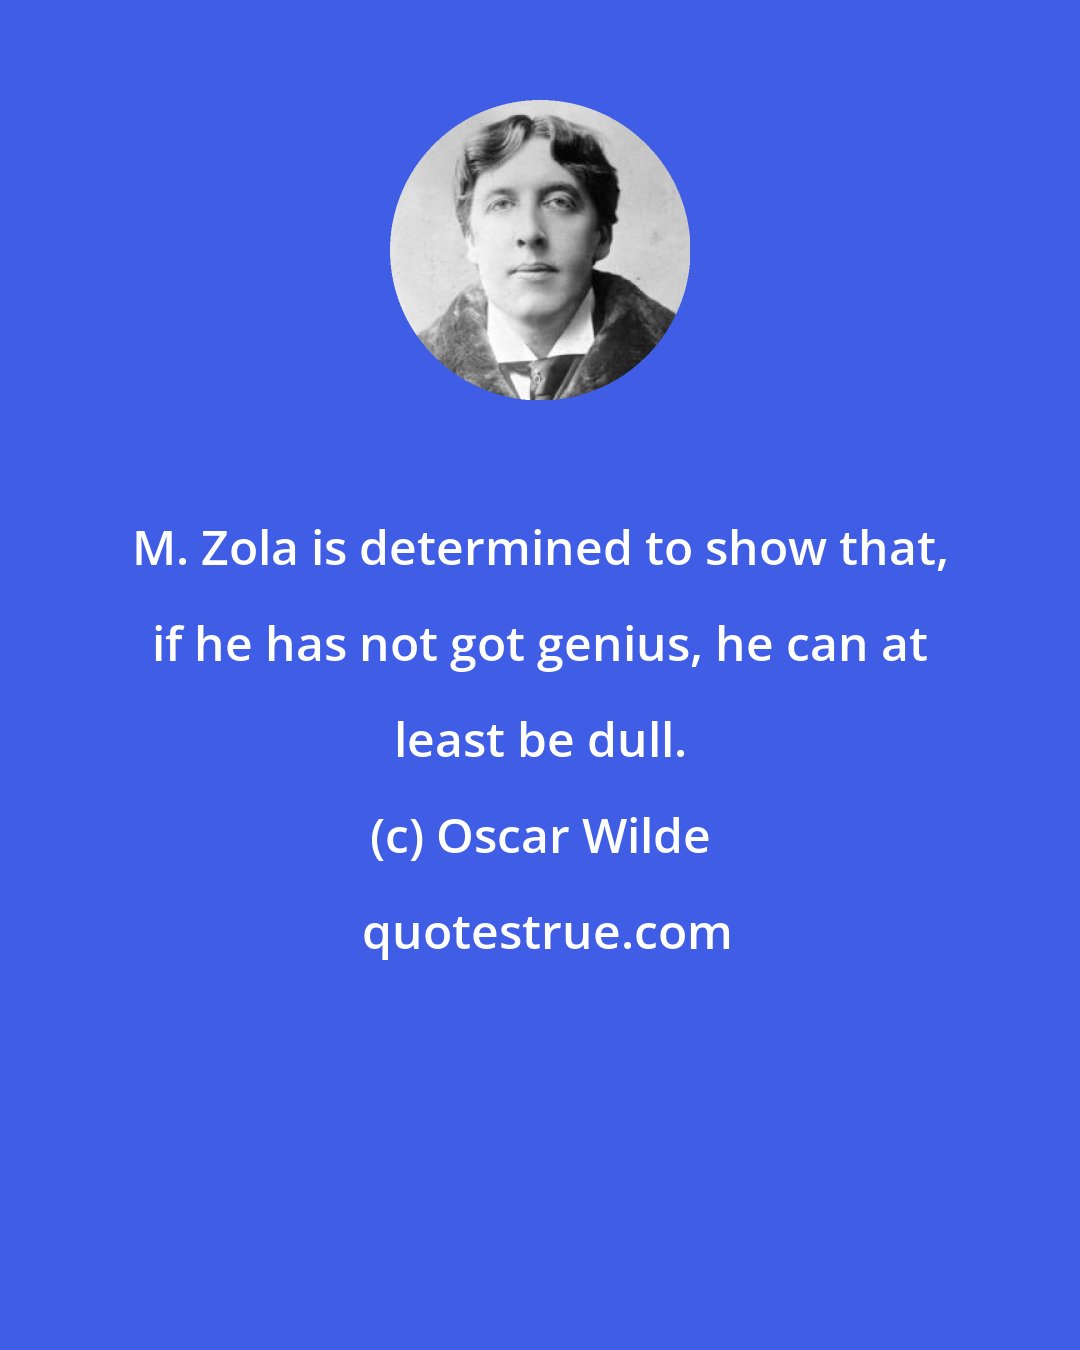 Oscar Wilde: M. Zola is determined to show that, if he has not got genius, he can at least be dull.